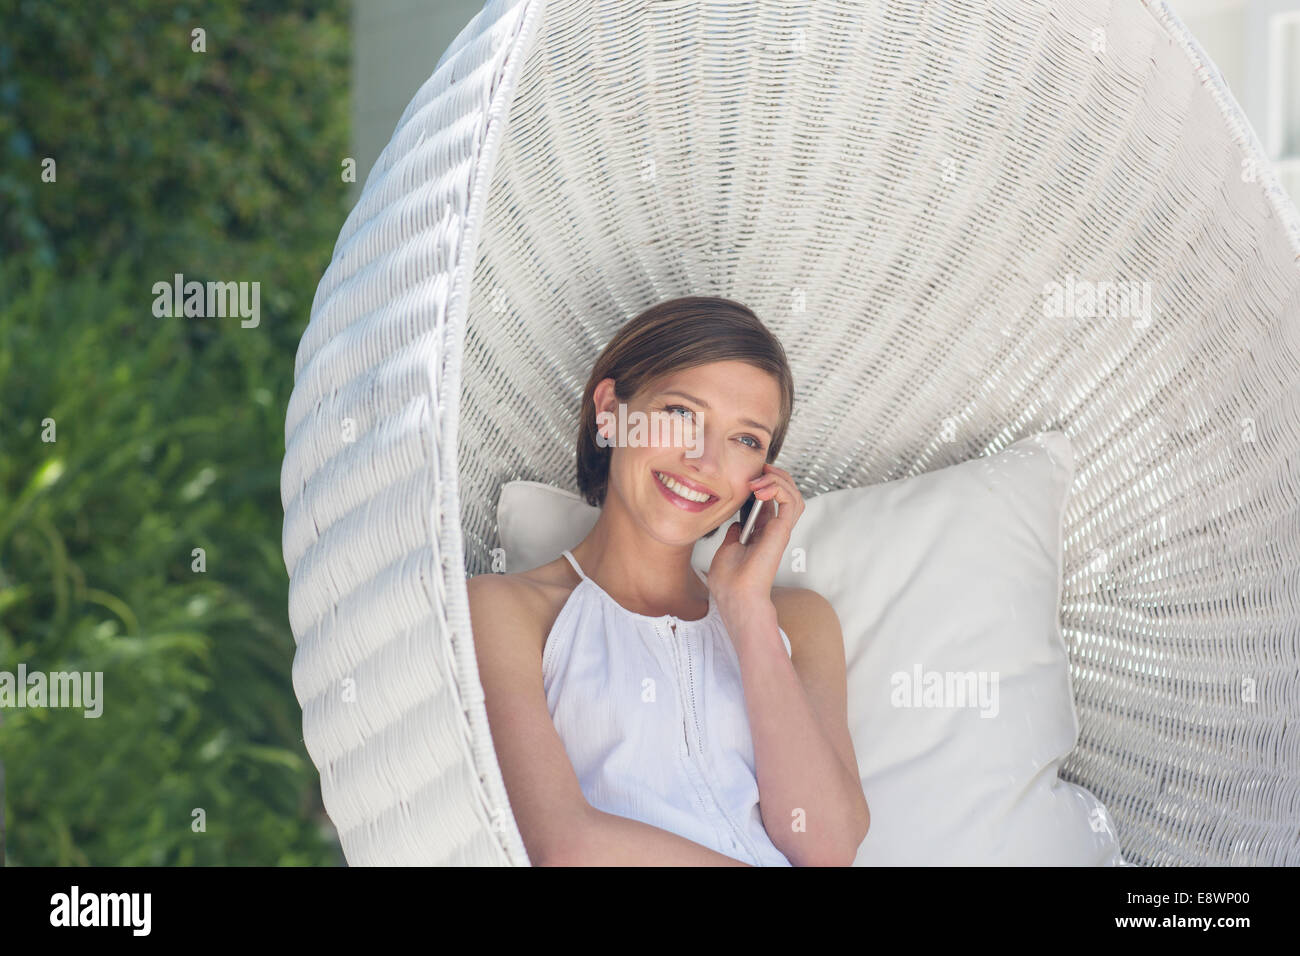 Woman talking on cell phone in hanging wicker chair outdoors Stock Photo